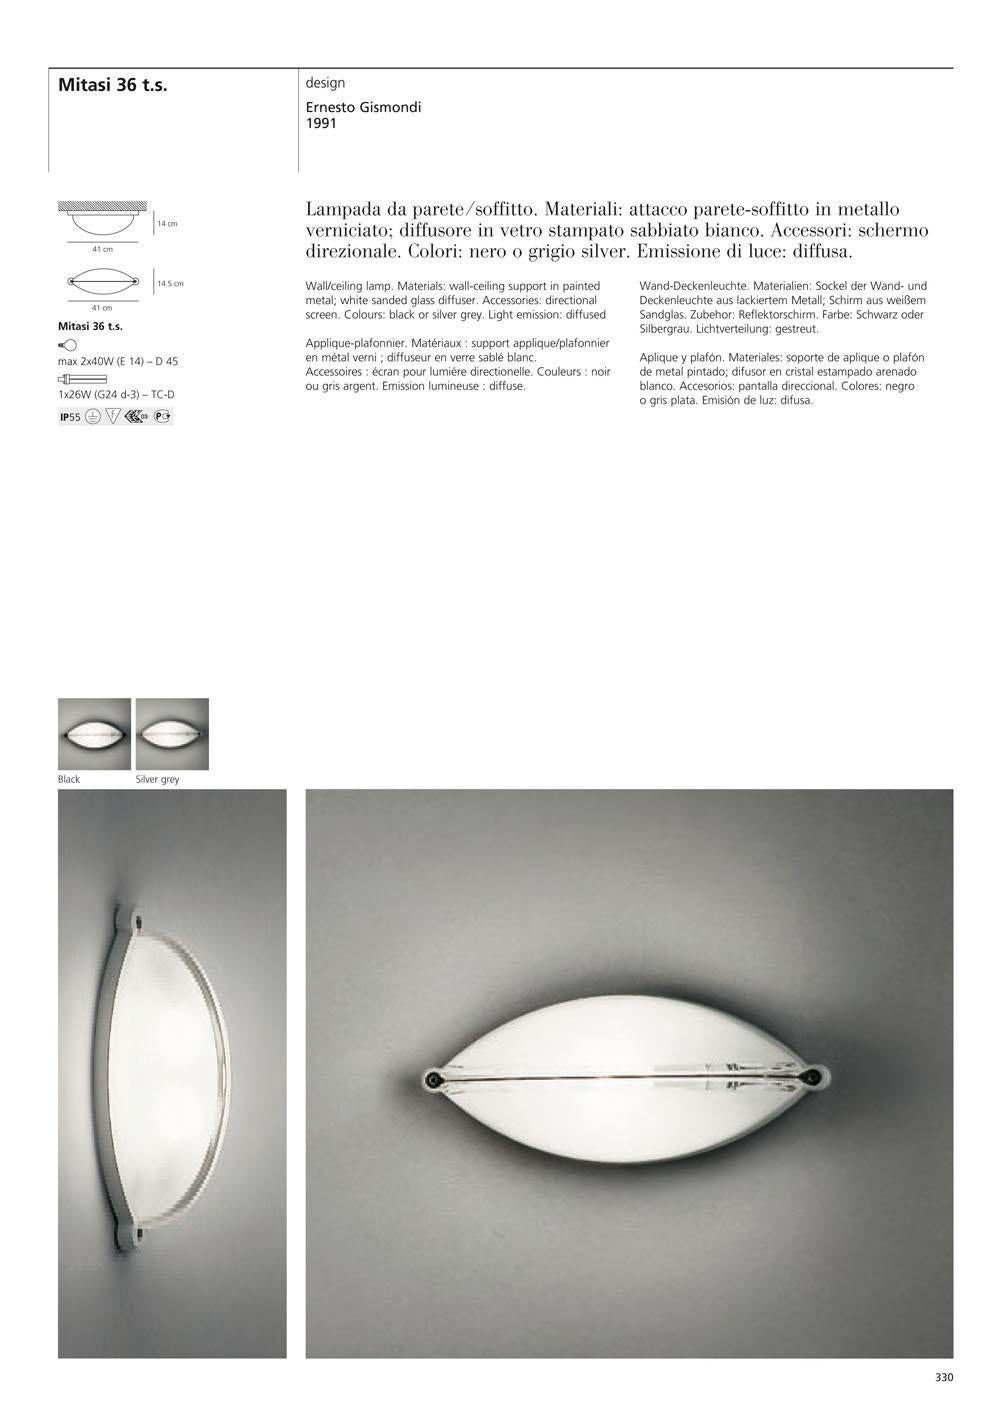 Pair of Outdoor Mitasi Wall Lamps by Artemide, 2 Pairs Available 2